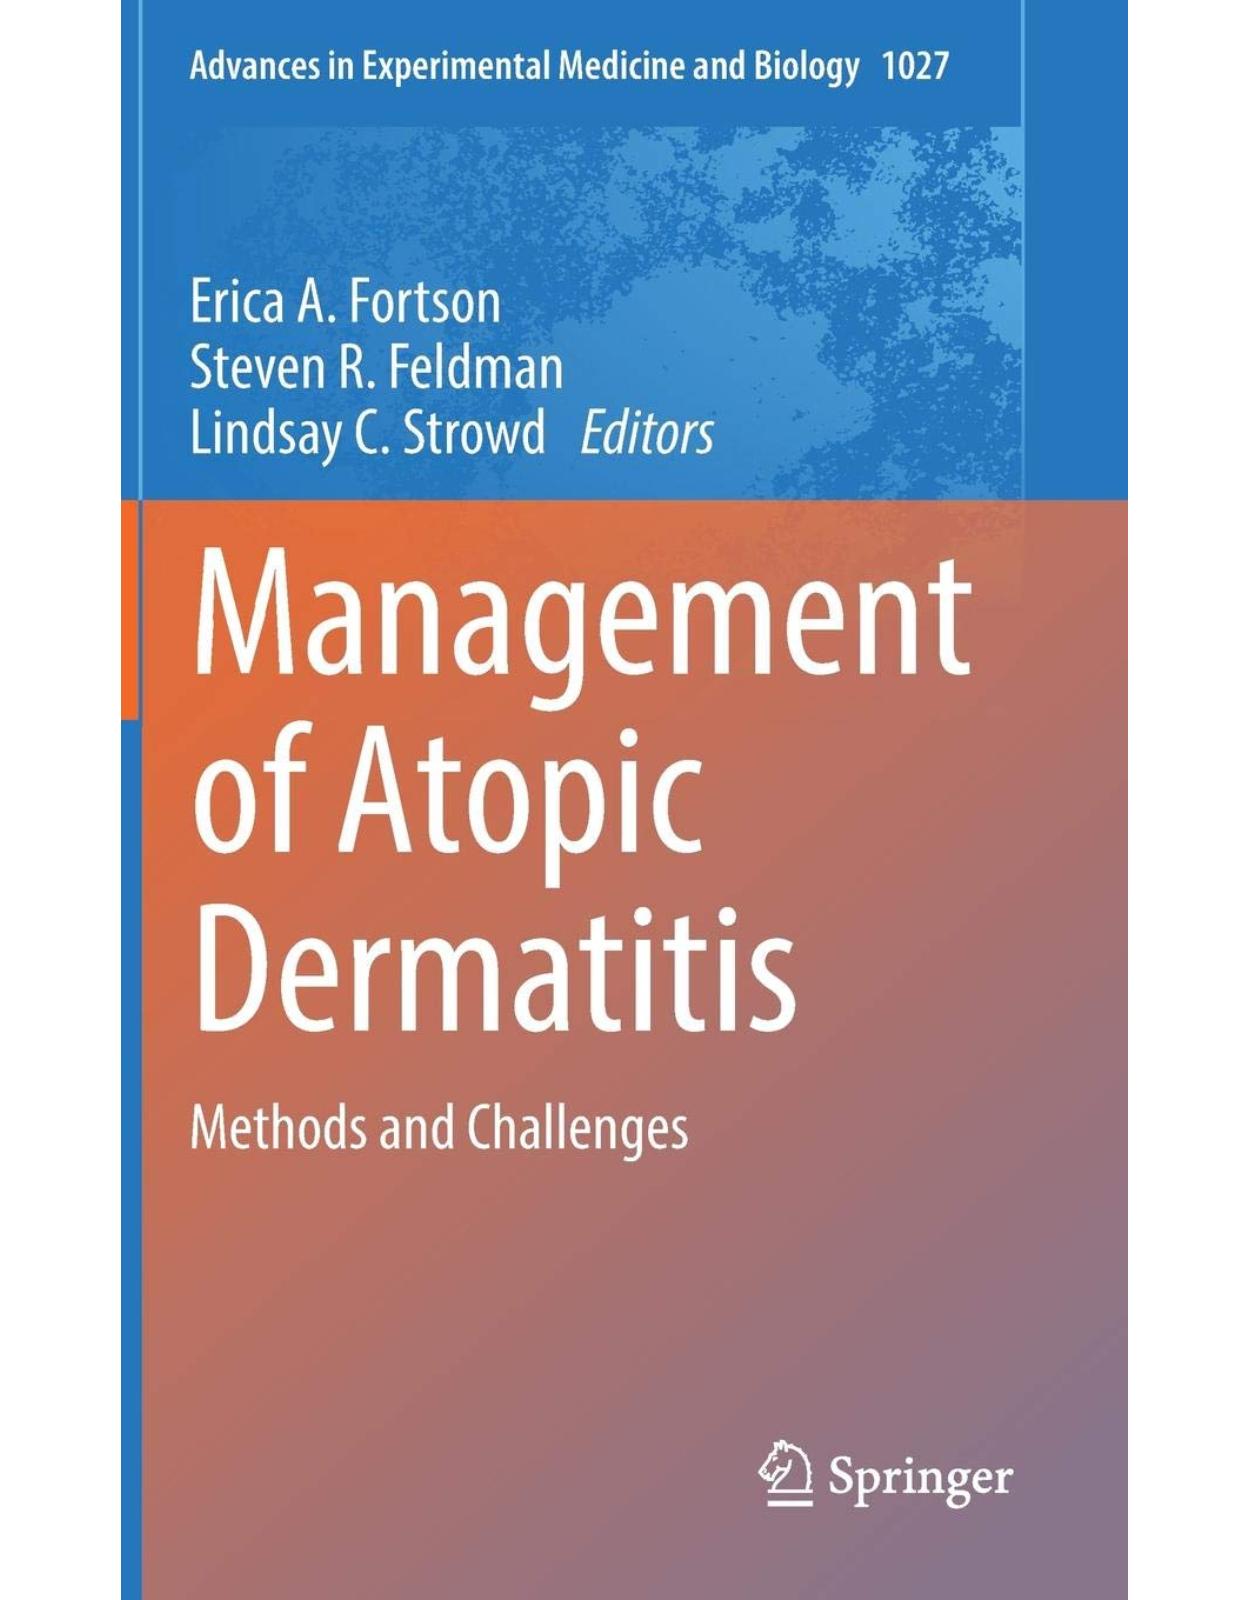 Management of Atopic Dermatitis. Methods and Challenges